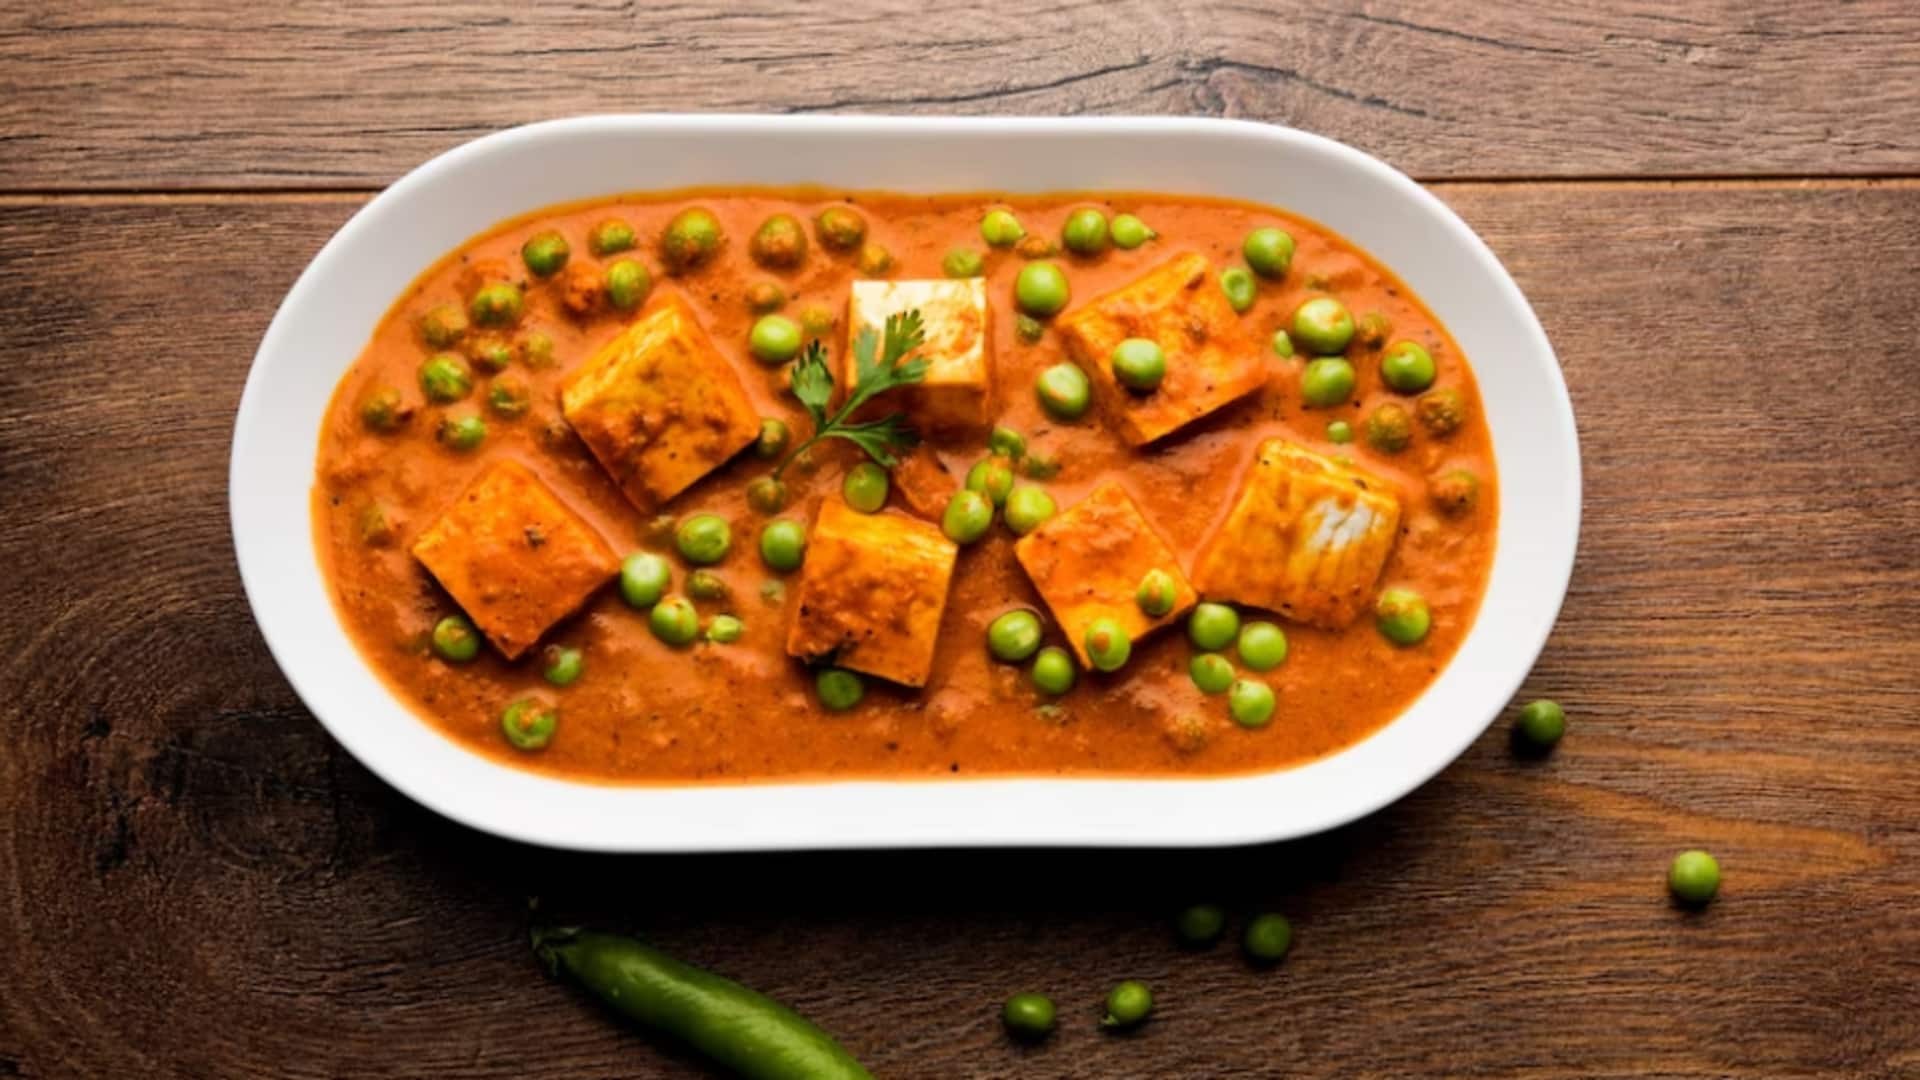 Cook matar paneer at home with this simple recipe